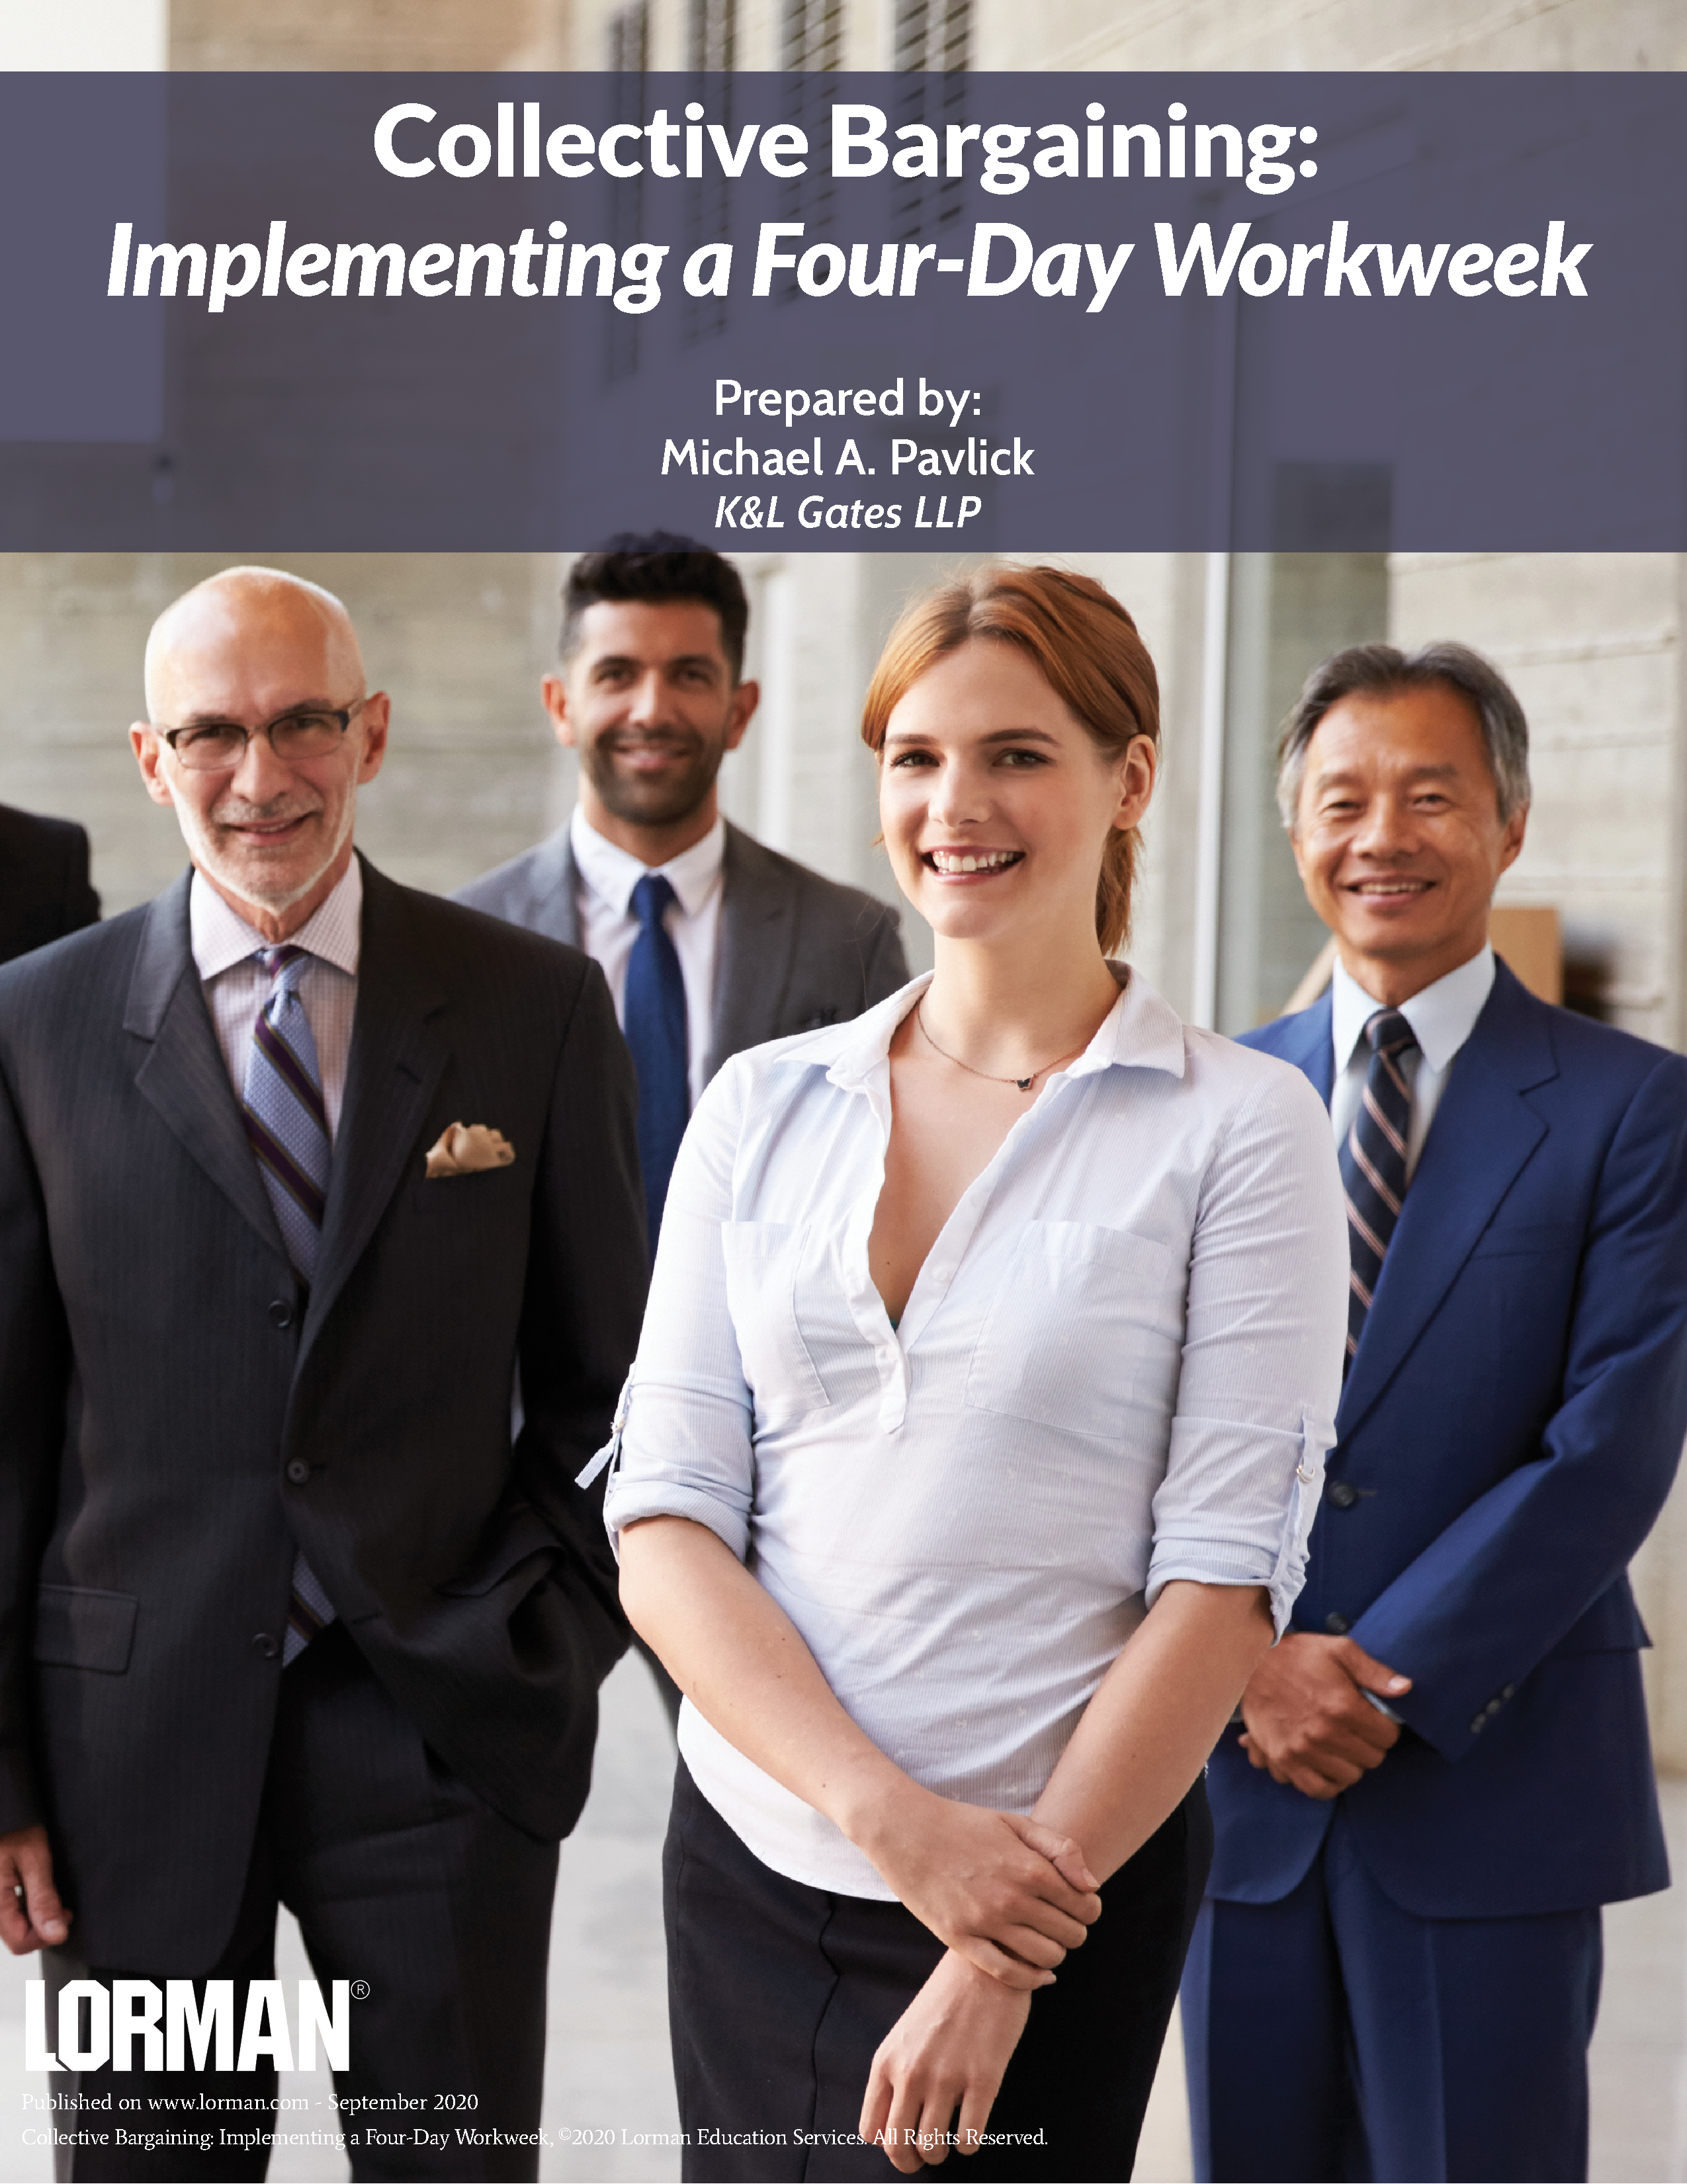 Collective Bargaining: Implementing a Four-Day Workweek